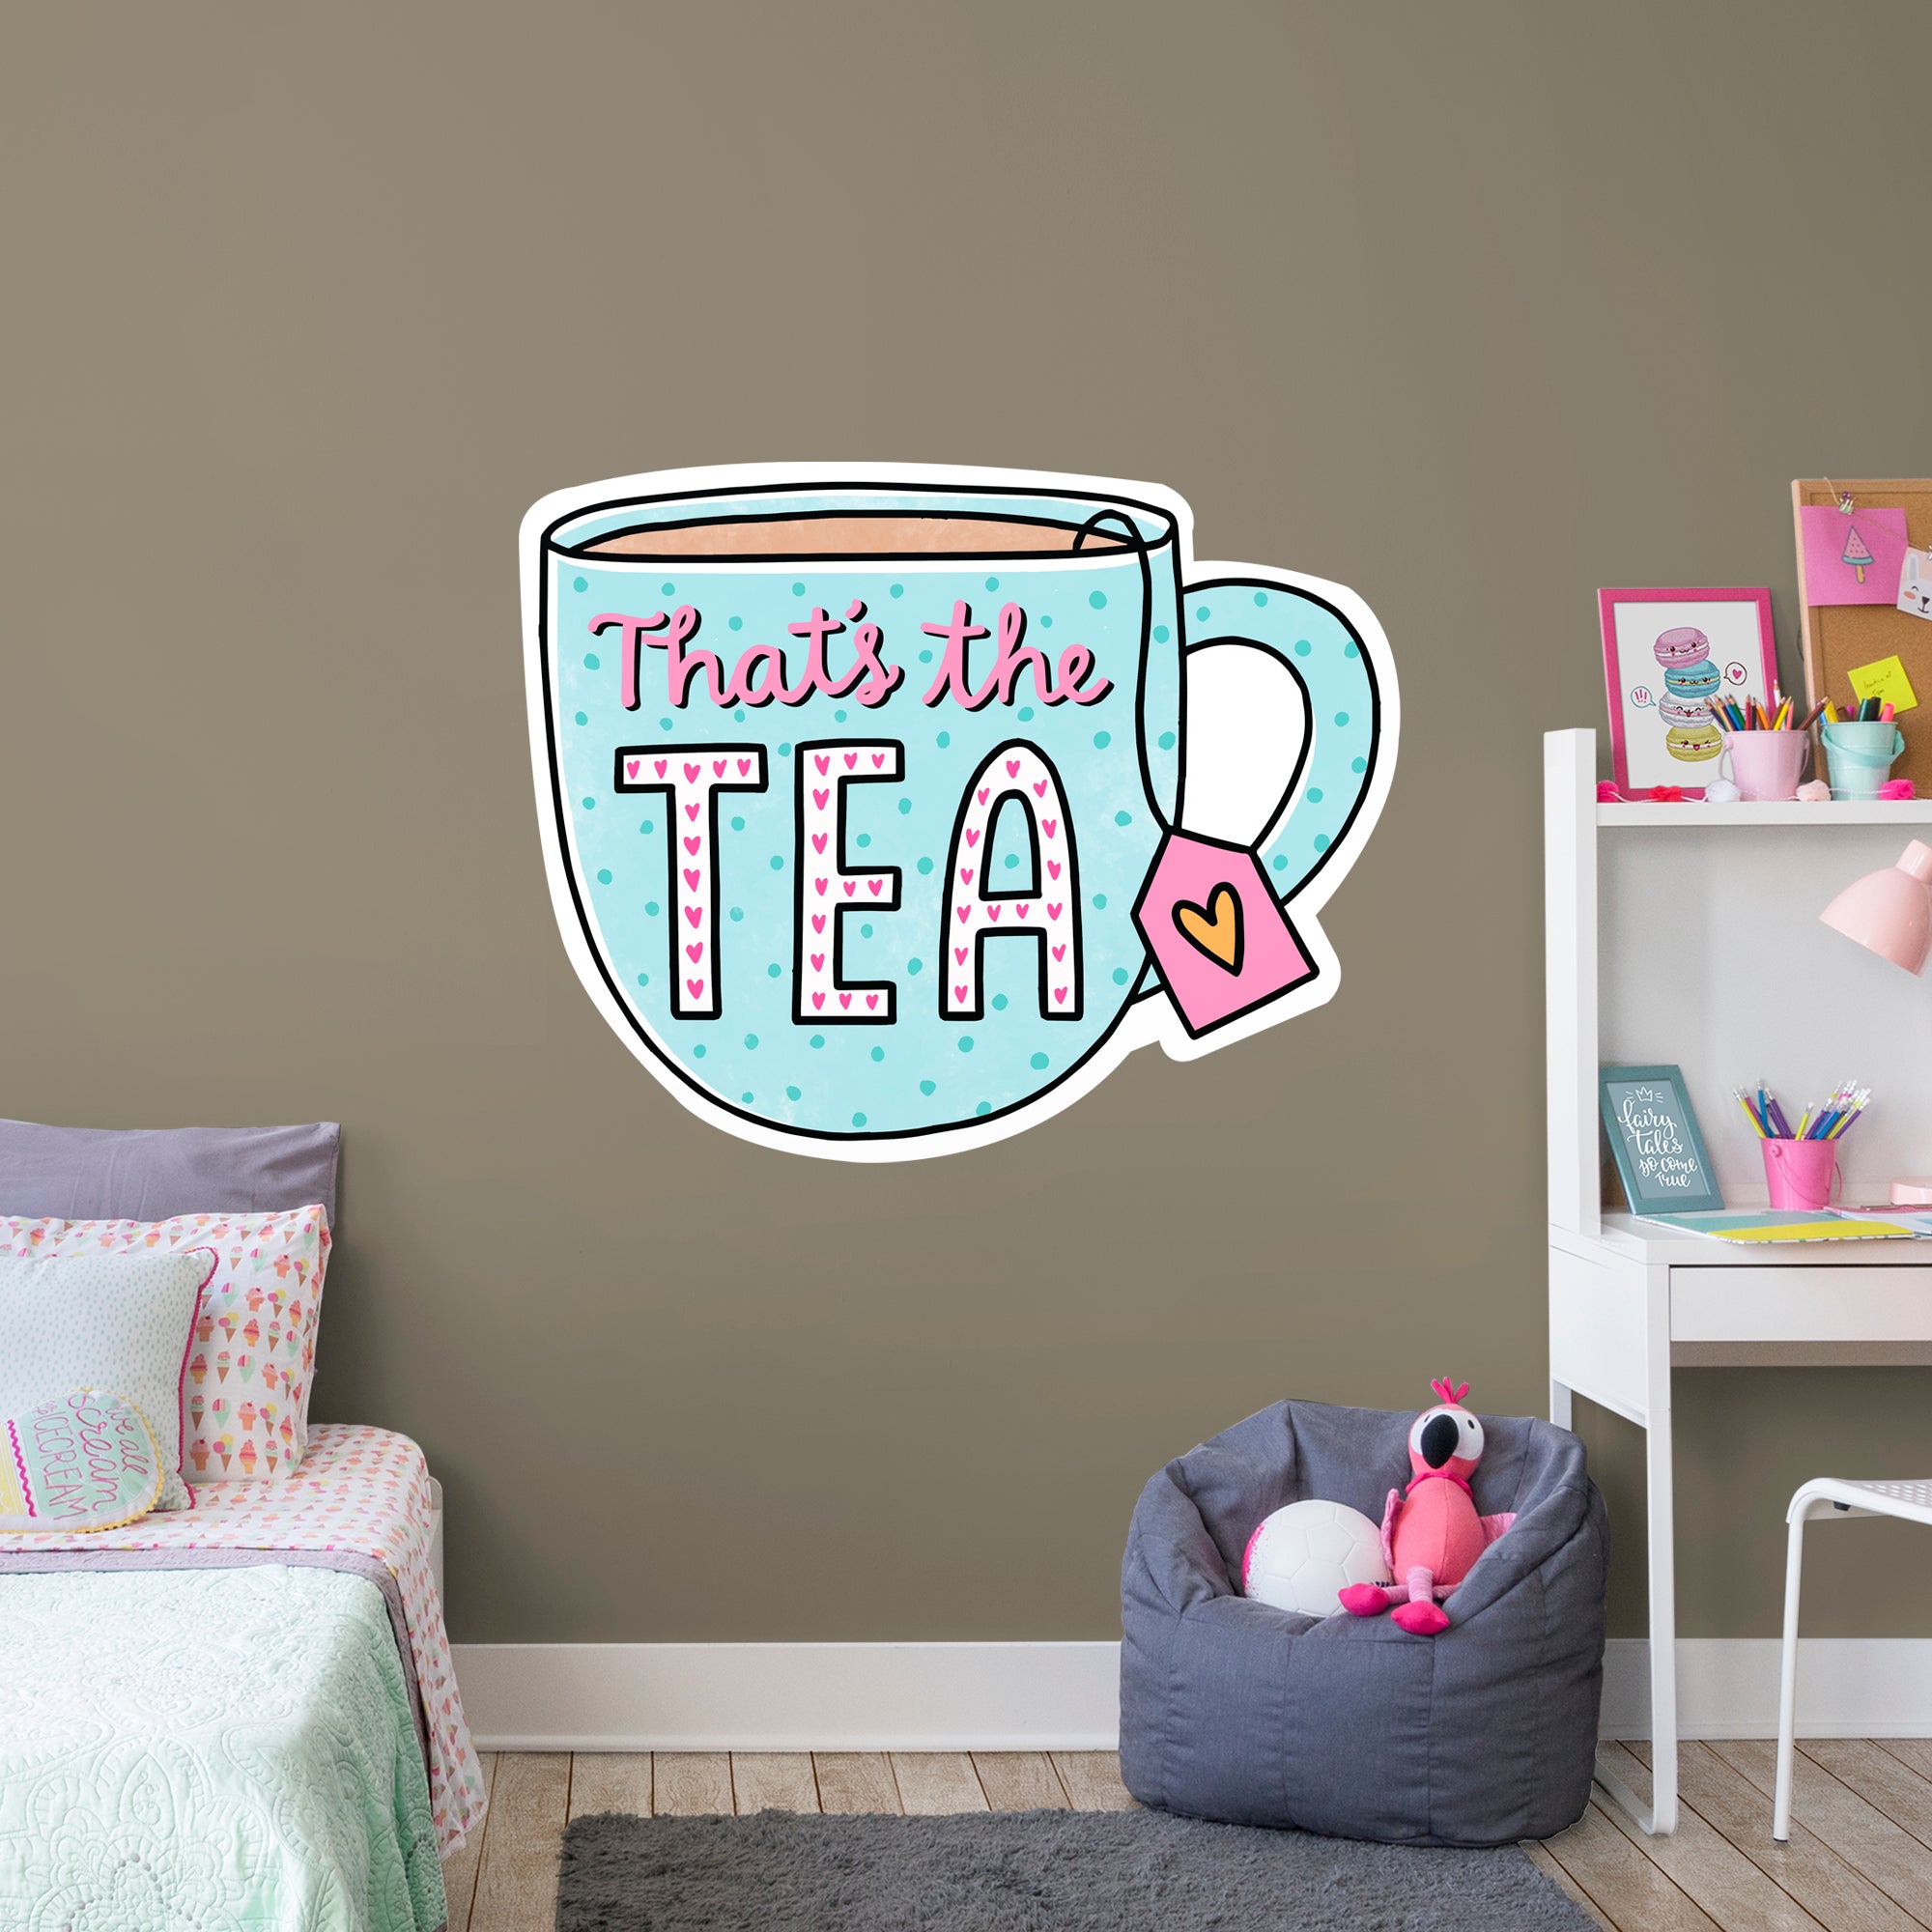 Thats The Tea - Officially Licensed Big Moods Removable Wall Decal Giant Decal (31"W x 38"H) by Fathead | Vinyl